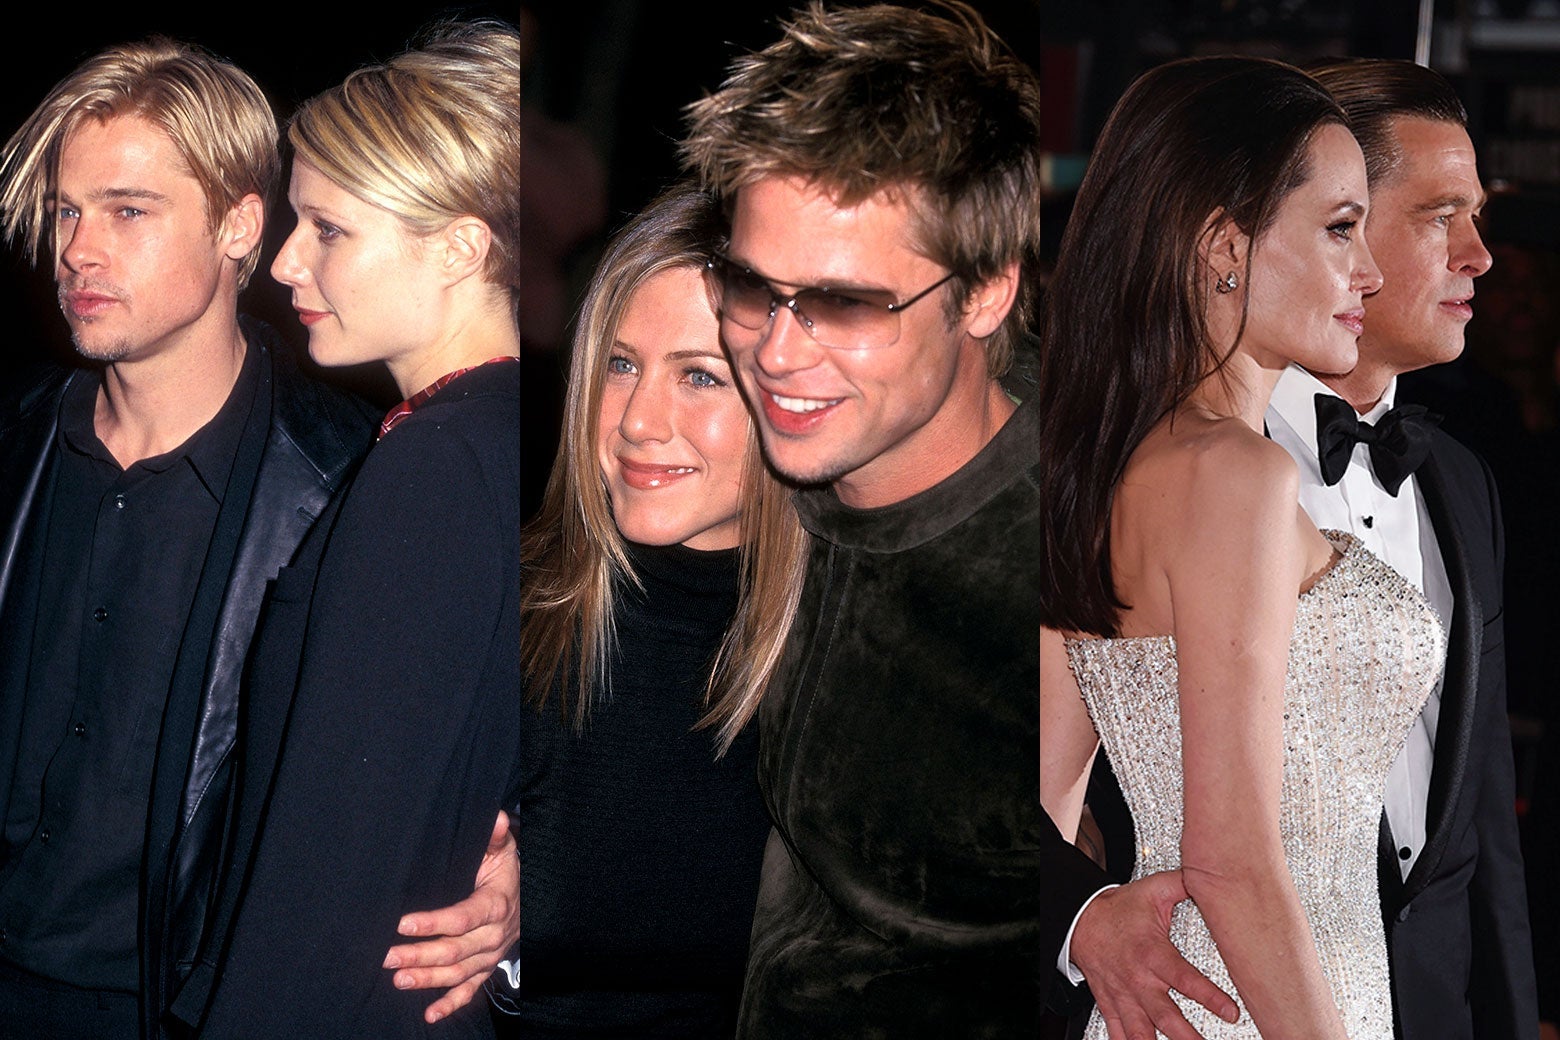 Triptych of photos of Pitt and Gwyneth Paltrow, Pitt and Jennifer Aniston, and Pitt and Angelina Jolie.